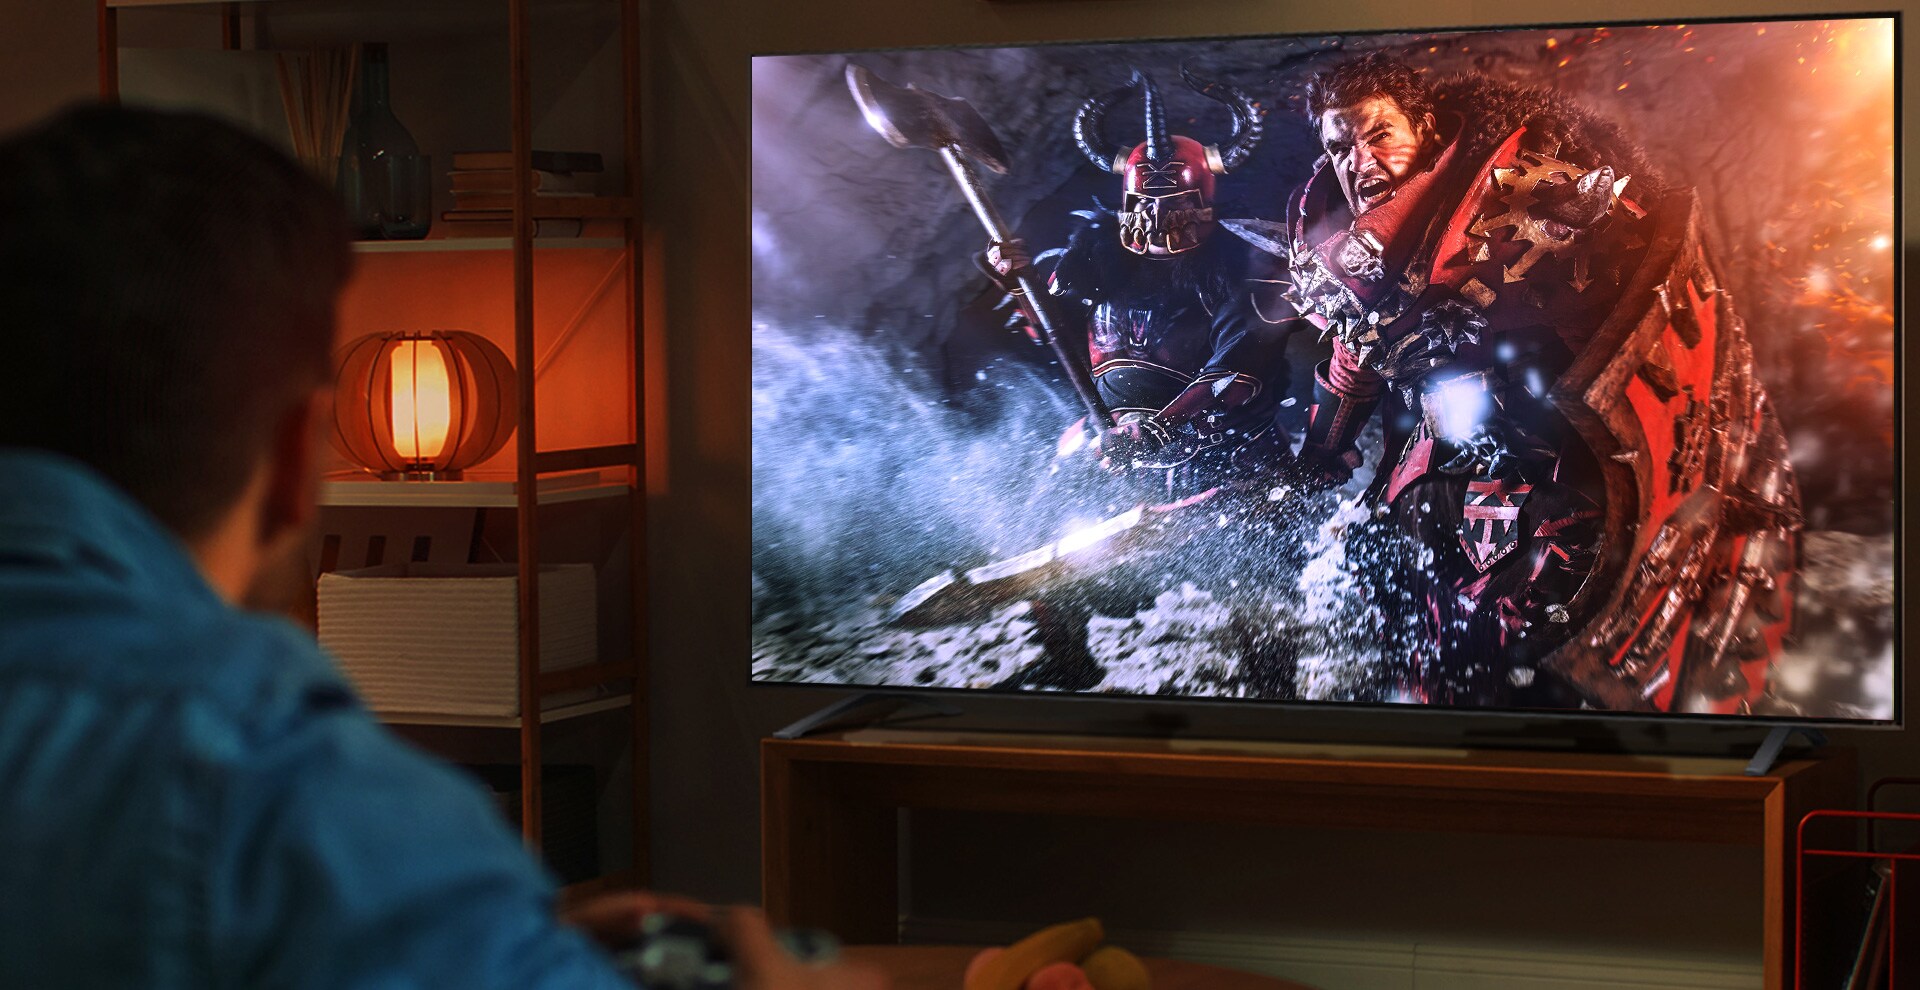 Man in a dark room sitting on a couch in front of a large TV playing a RPG game.